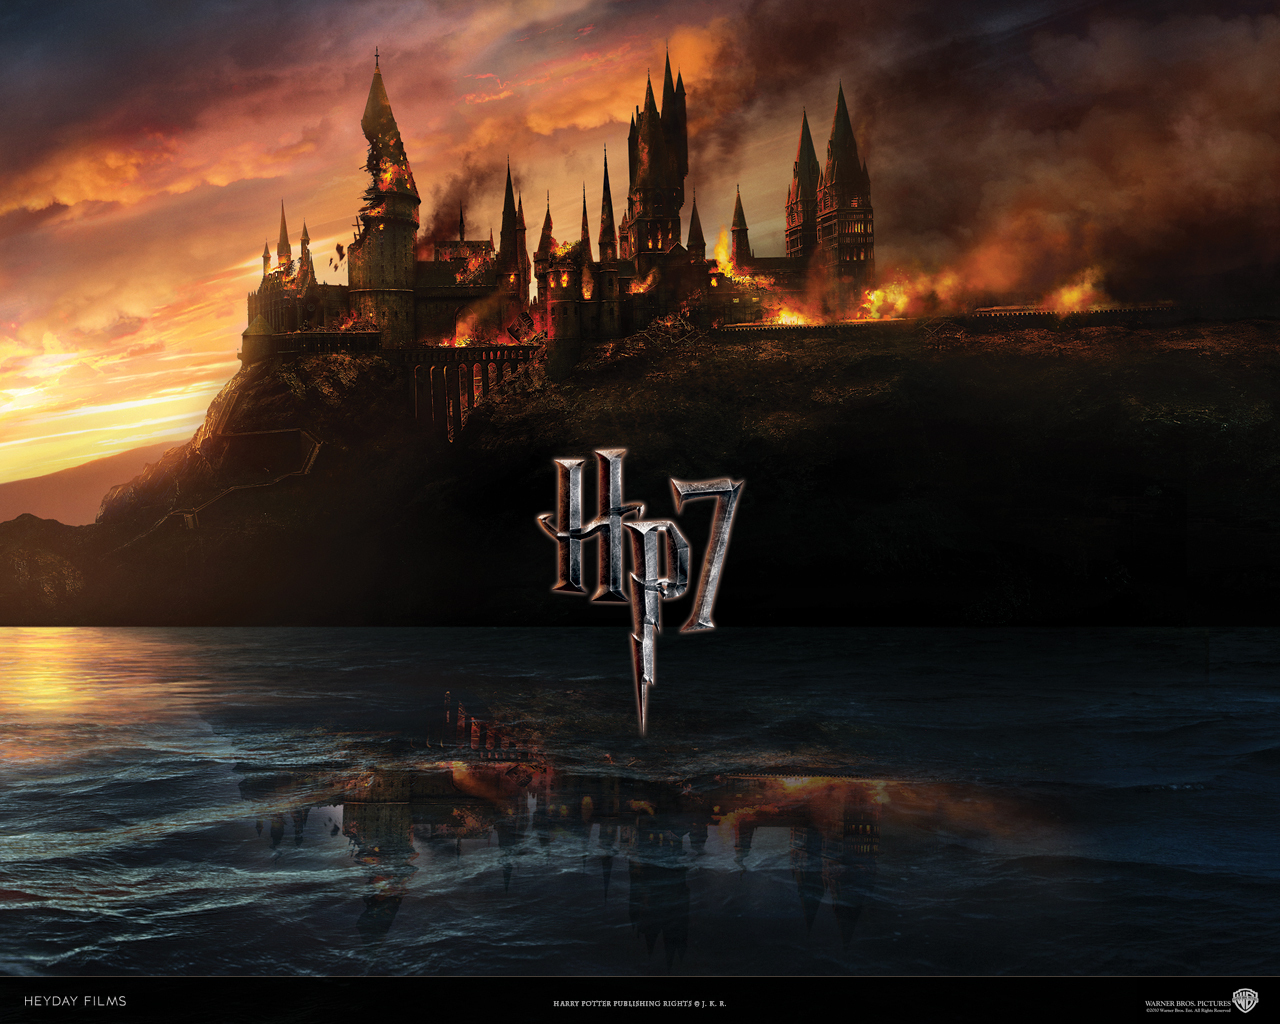 Hogwarts   Harry Potter and the Deathly Hallows Movies Wallpaper 1280x1024